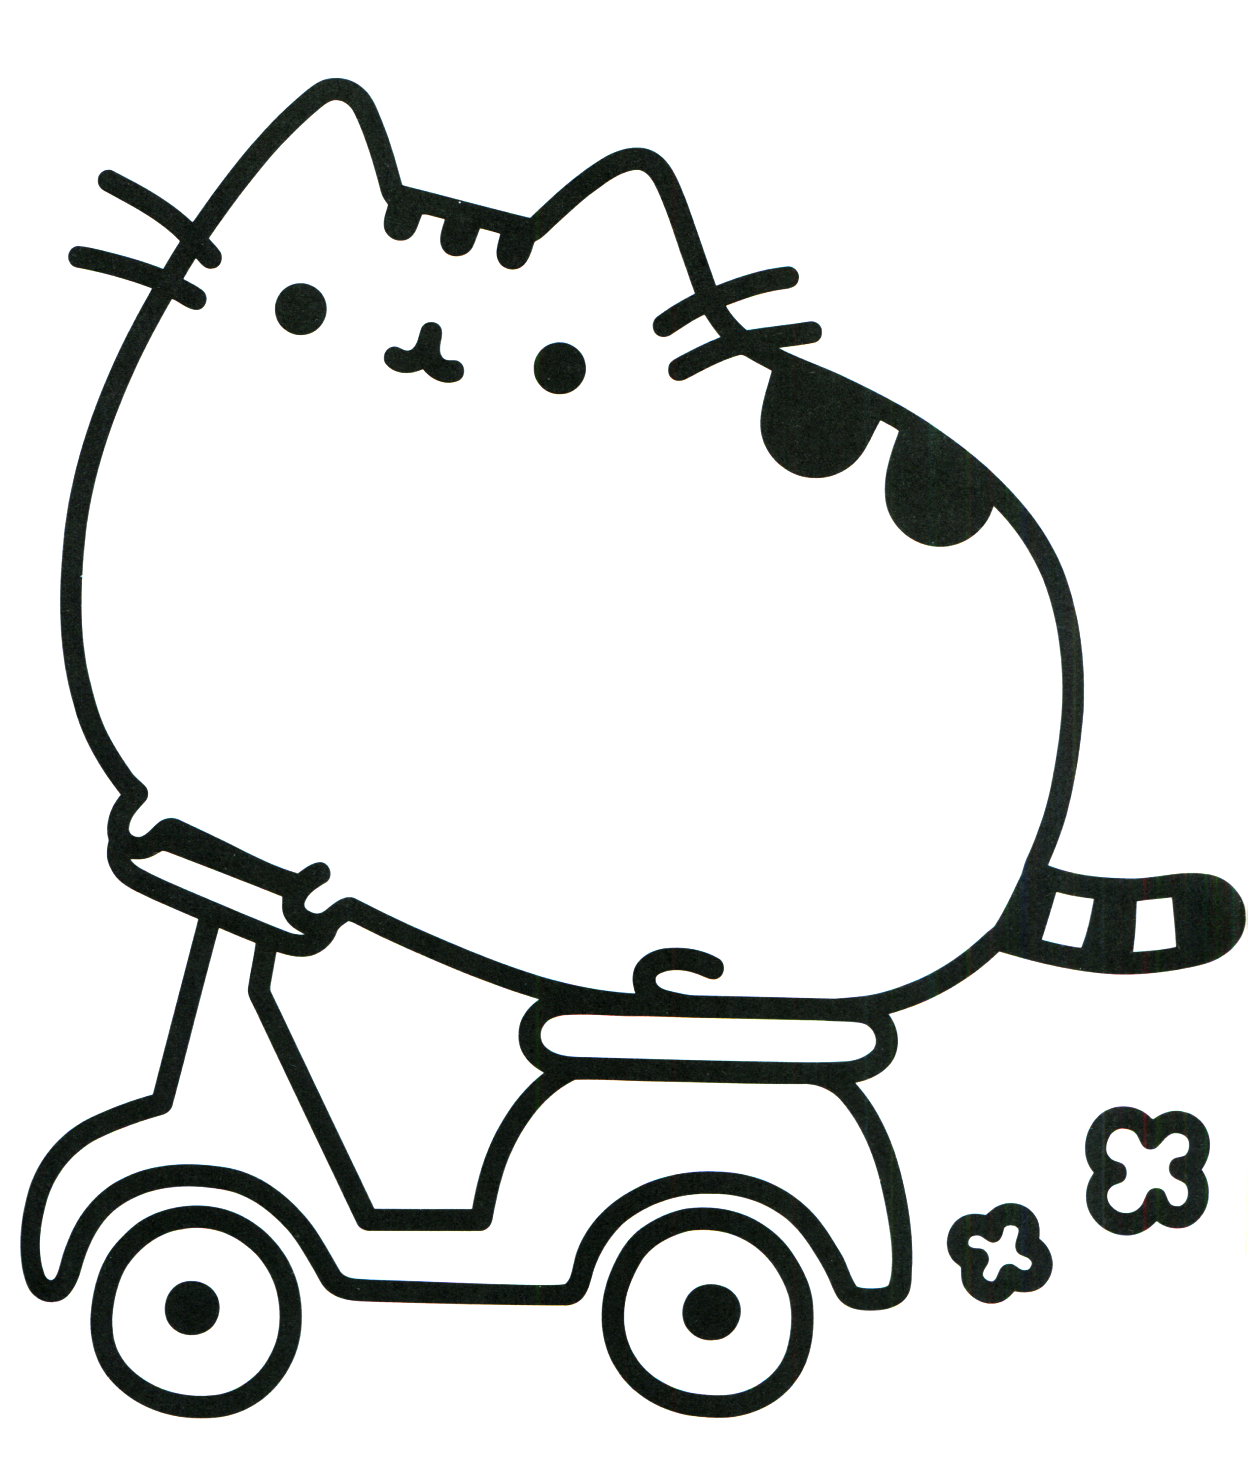 Pusheen Cat on a Motorbike Coloring Page